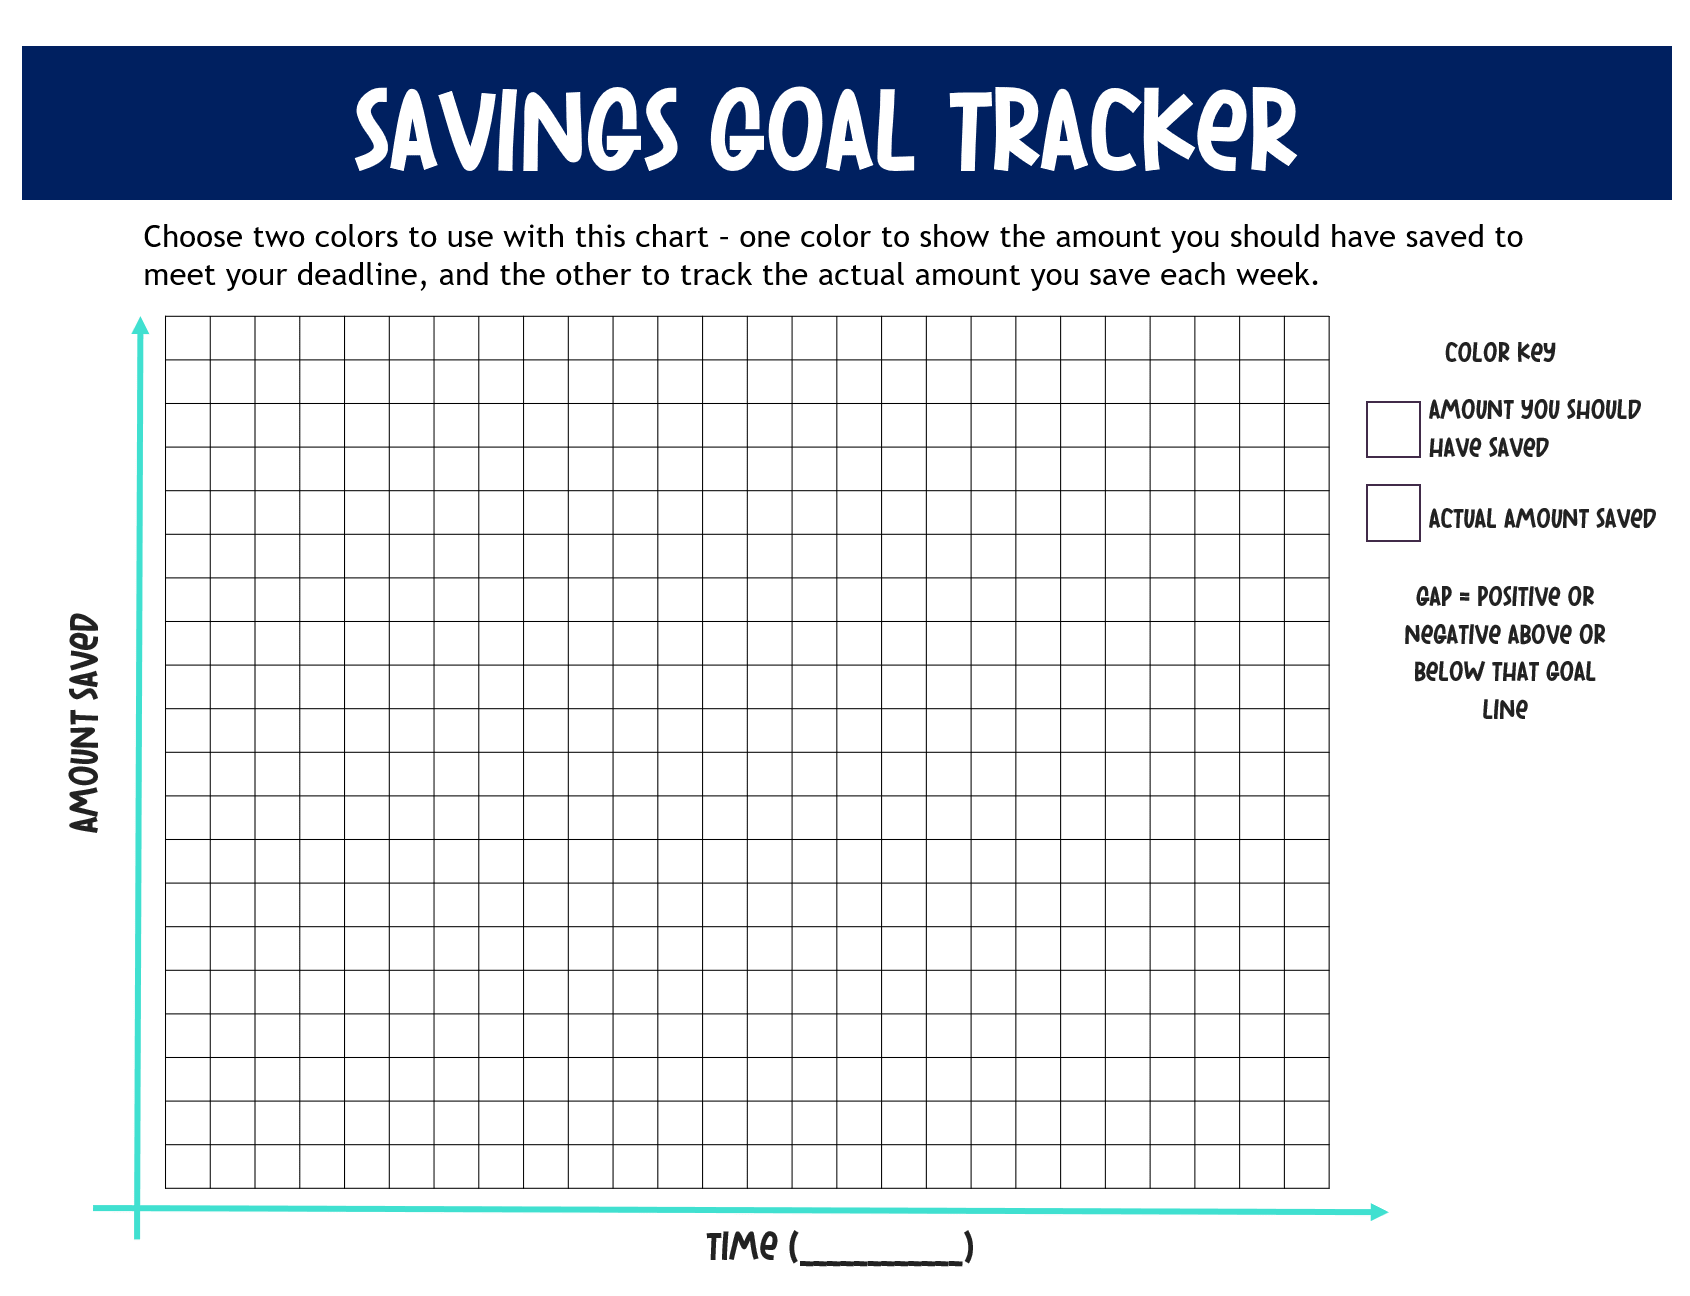 Navy blue and light blue, and white savings goal tracker chart with y-axis amount saved and x-axis time